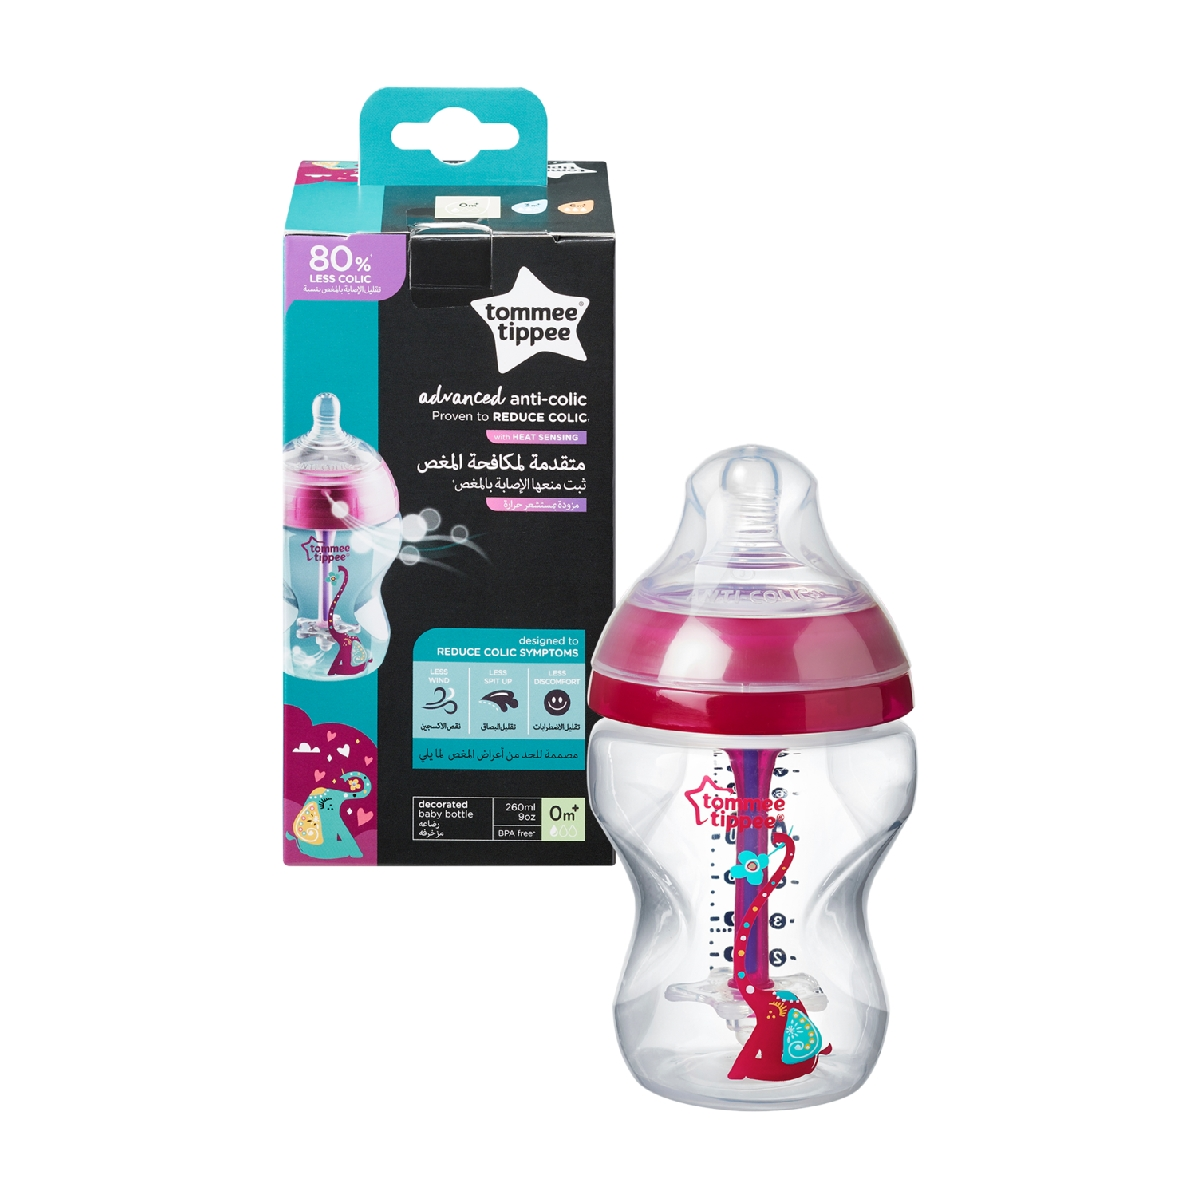 Tommee Tippee Advanced Anti-Colic Baby Bottle, 260ml, Slow-Flow